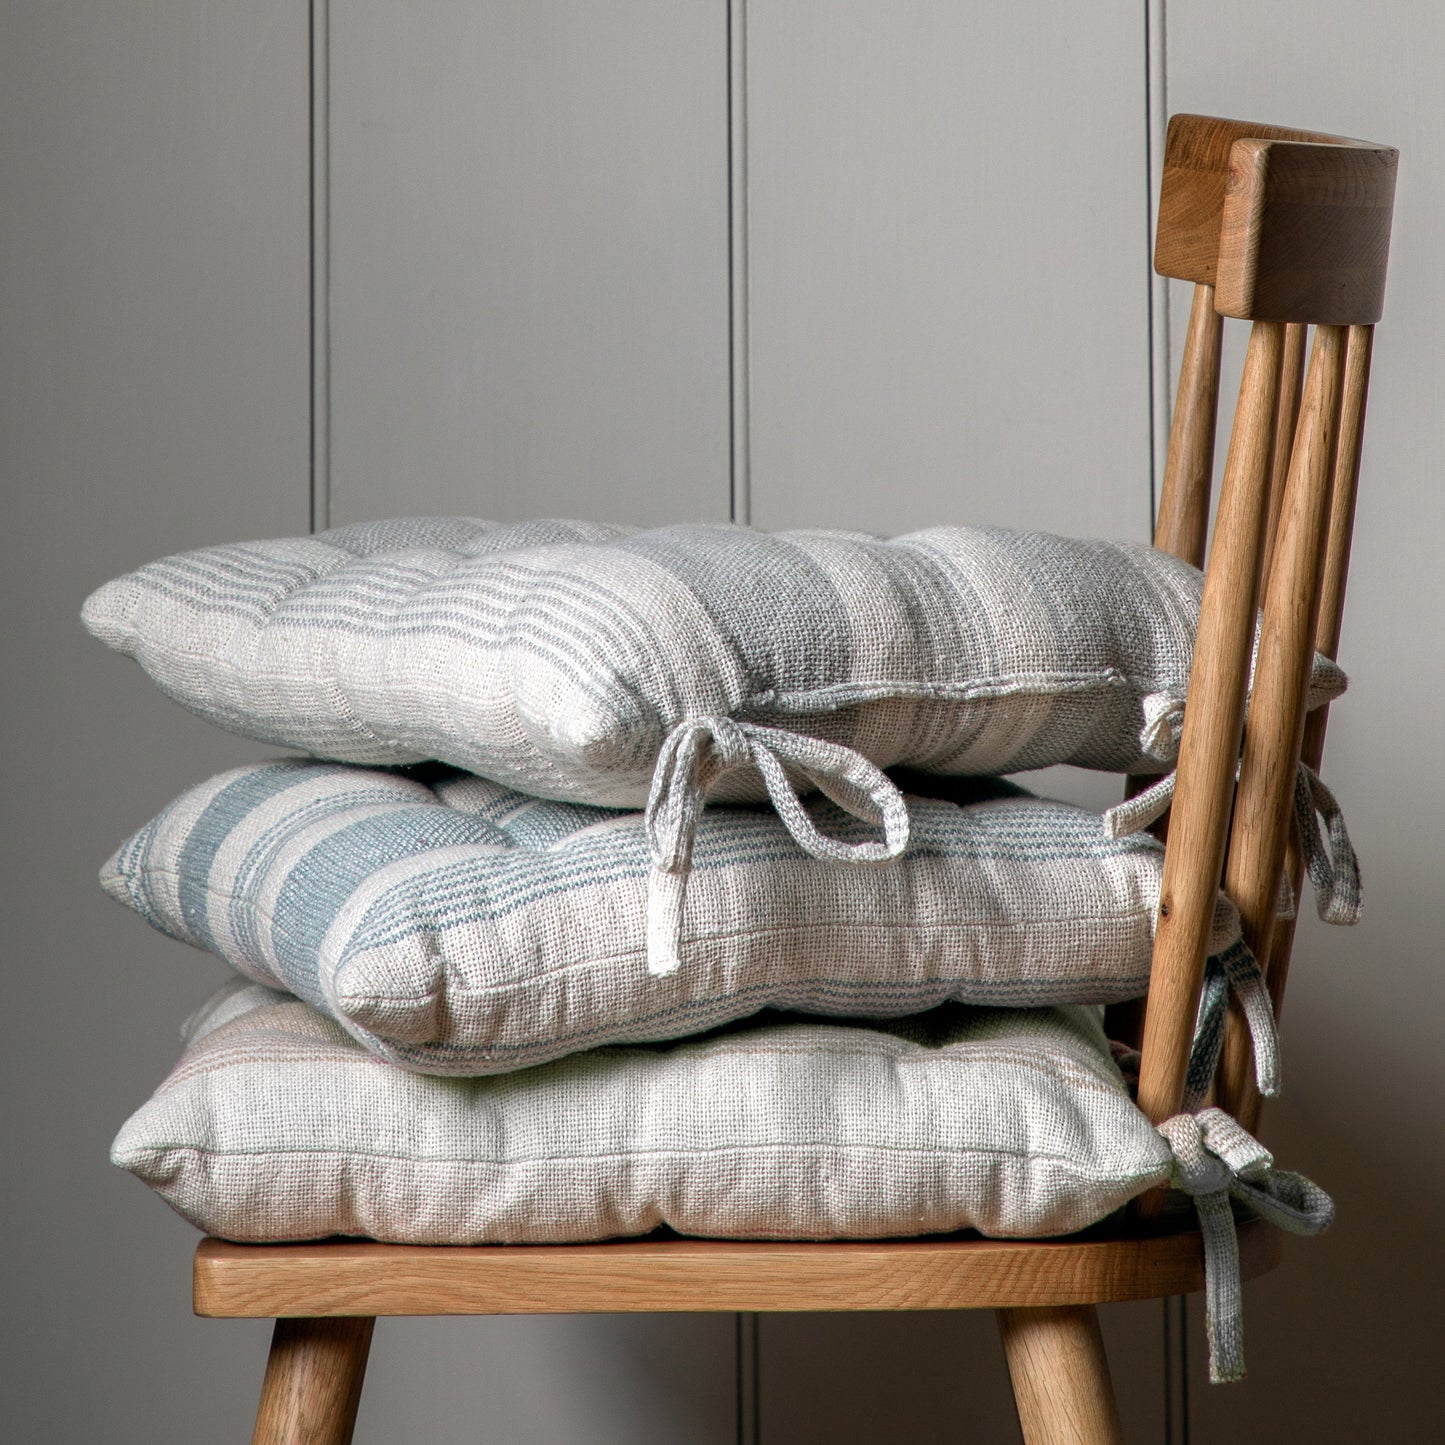 Four Simply Organic Str Seatpad Taupe 430x430mm (2pk) stacked on a wooden chair for interior decor.